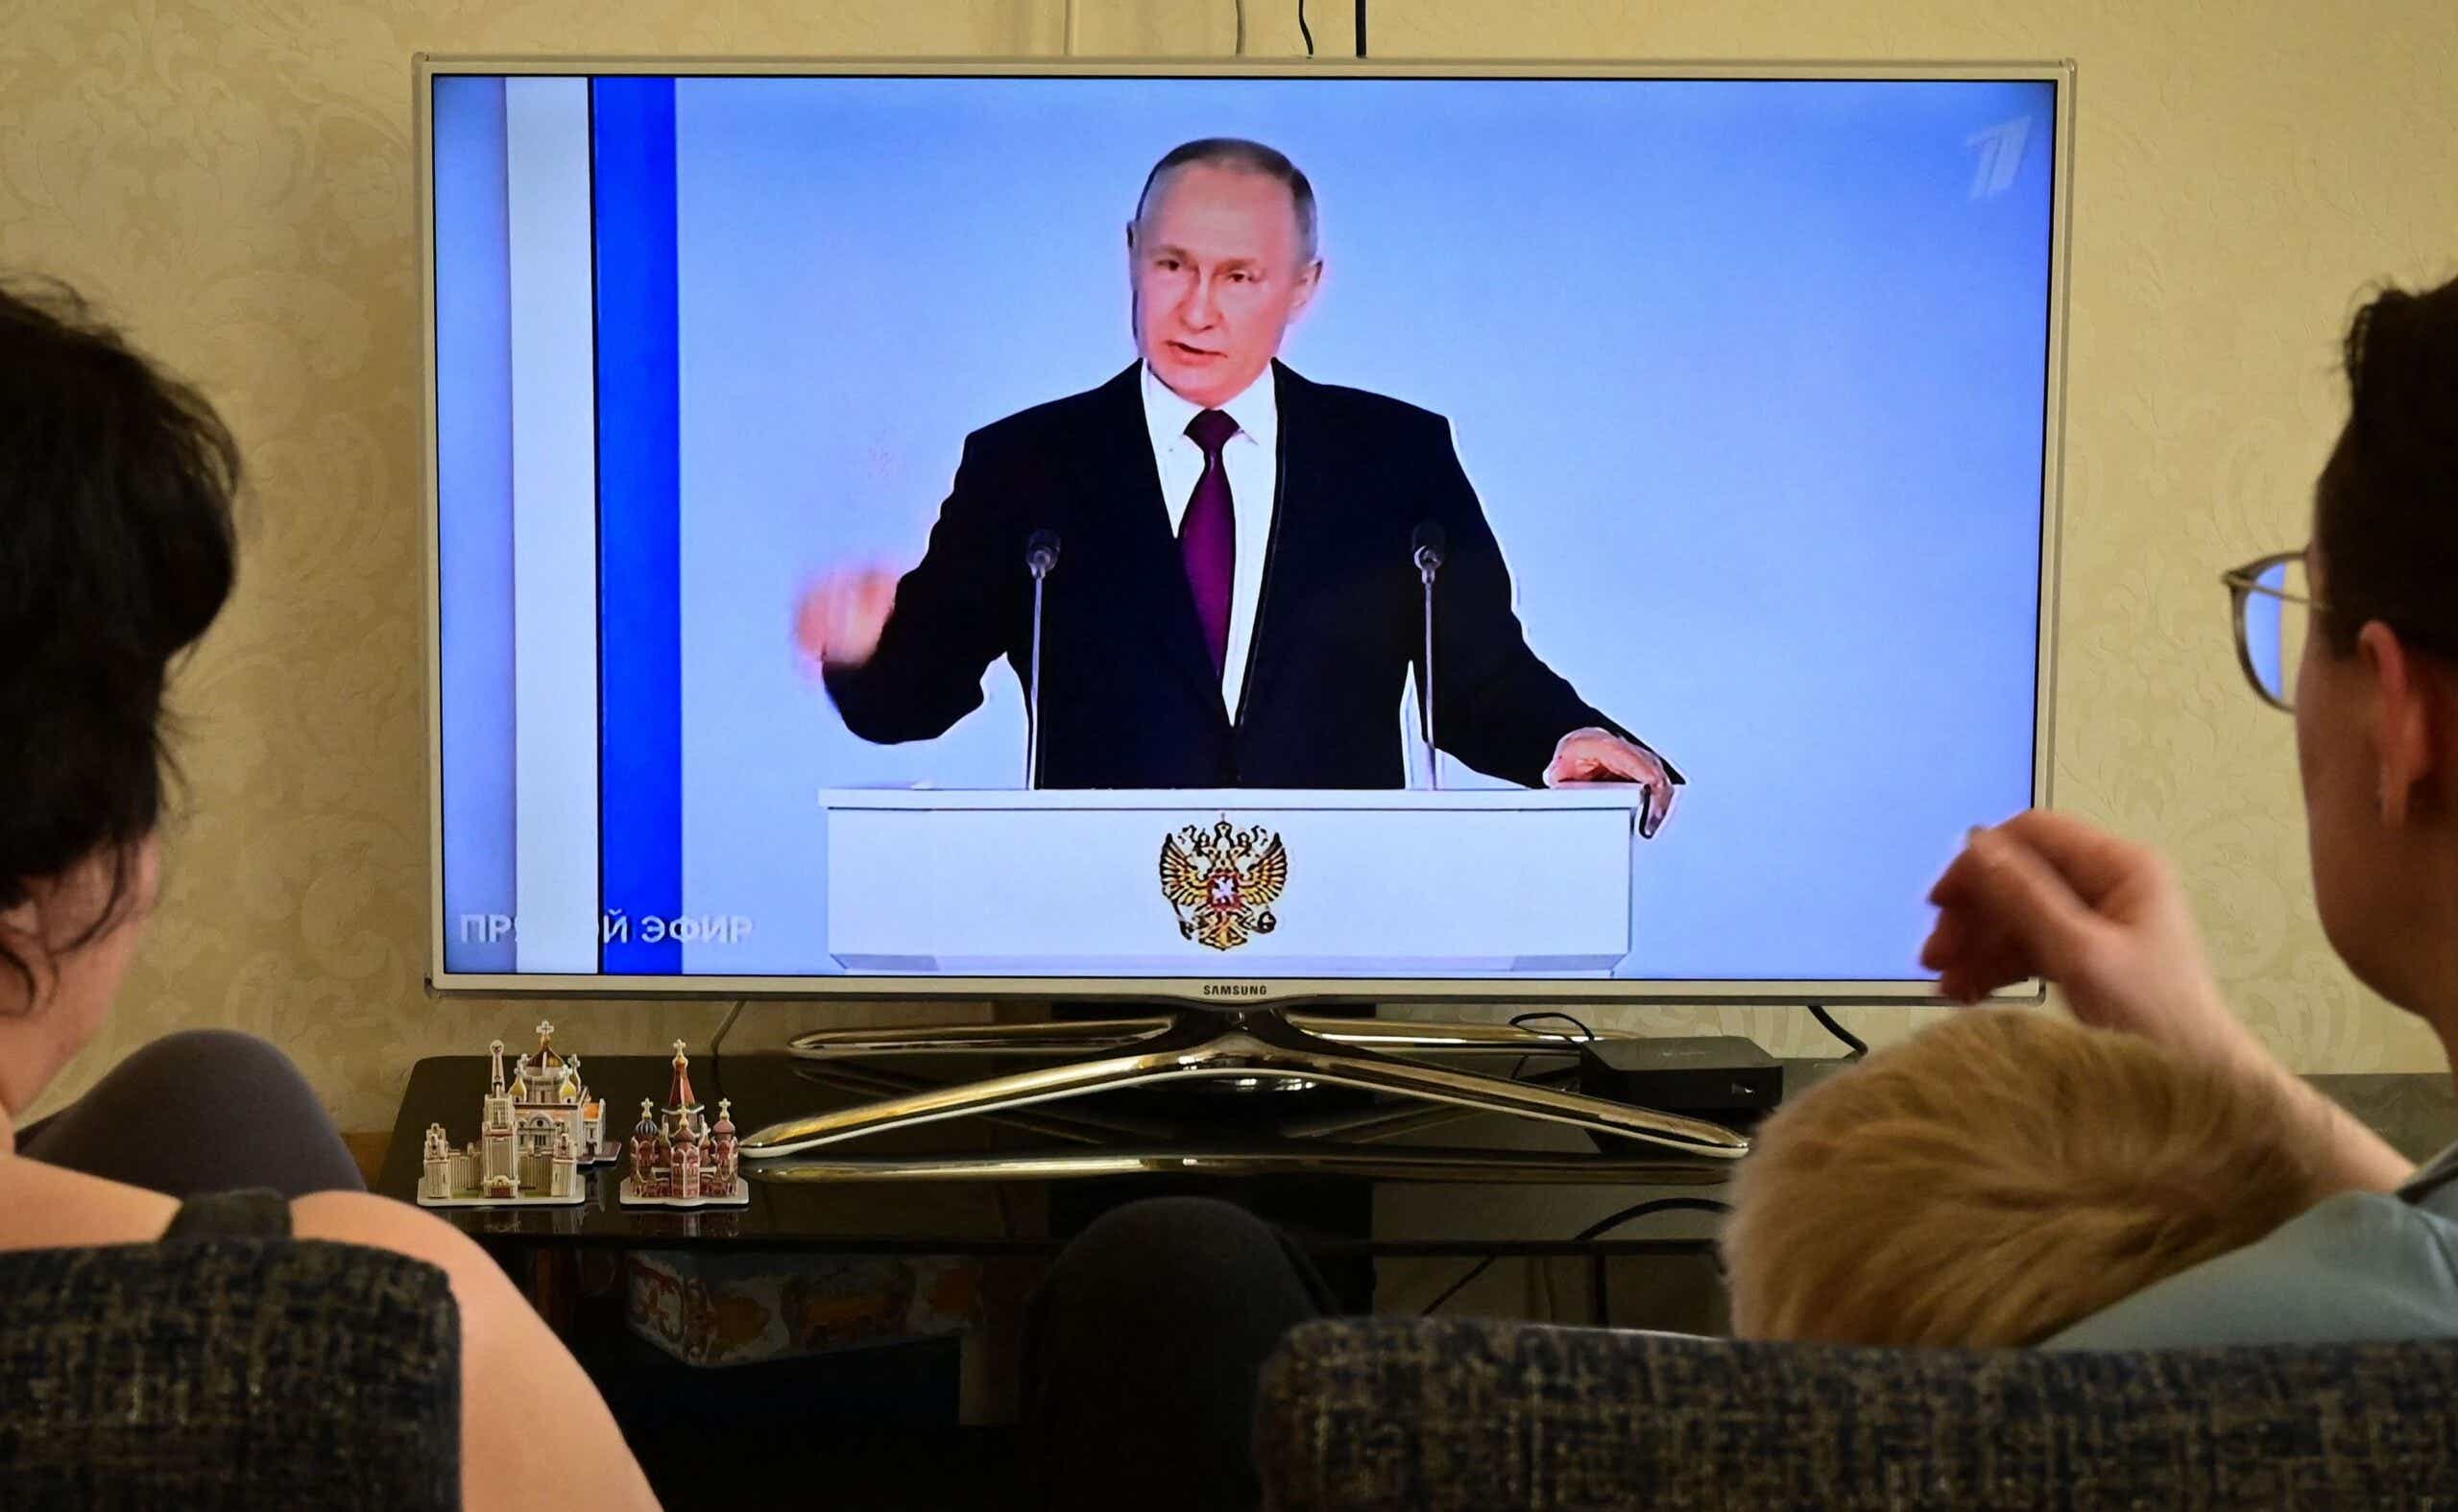 A family watches a TV broadcast of Russian President Vladimir Putin's address